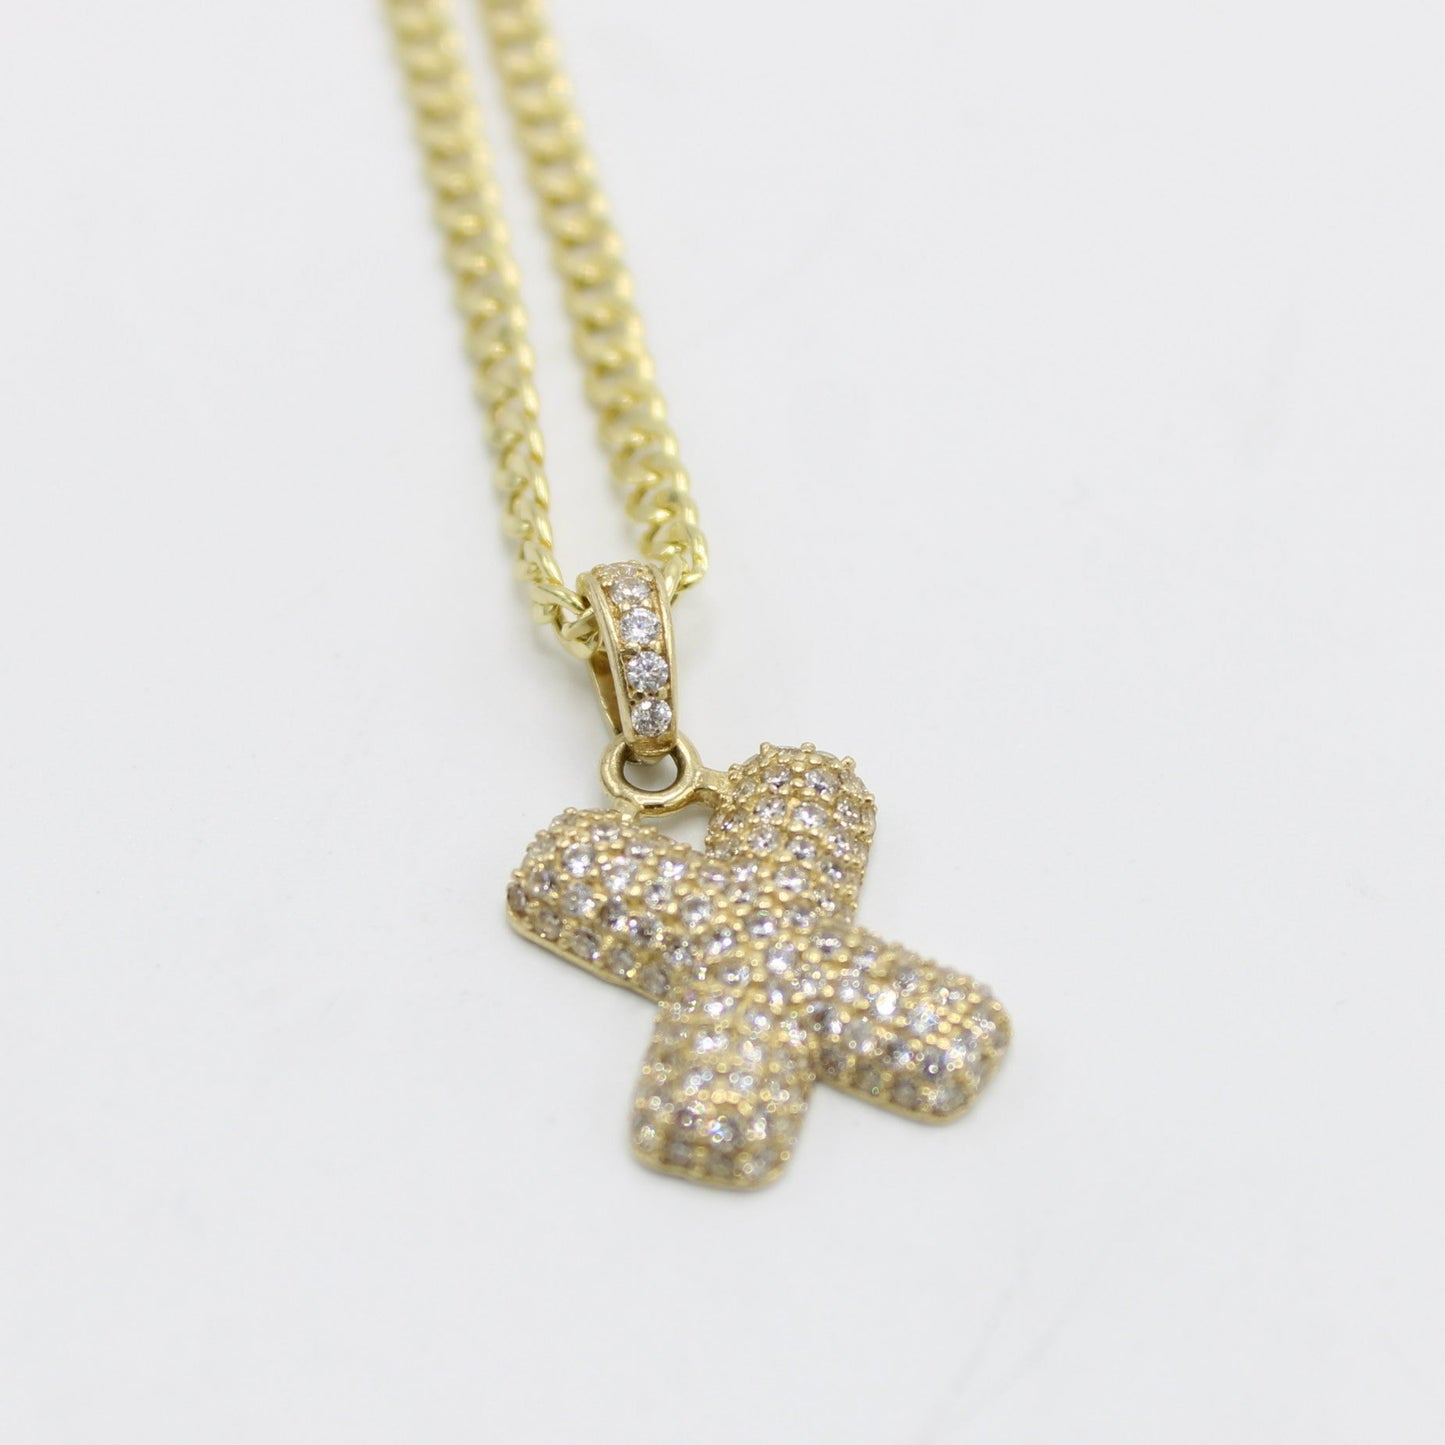 14K Initial Name (X) Pendant Cz Stones With Cuban Chain Yellow Gold